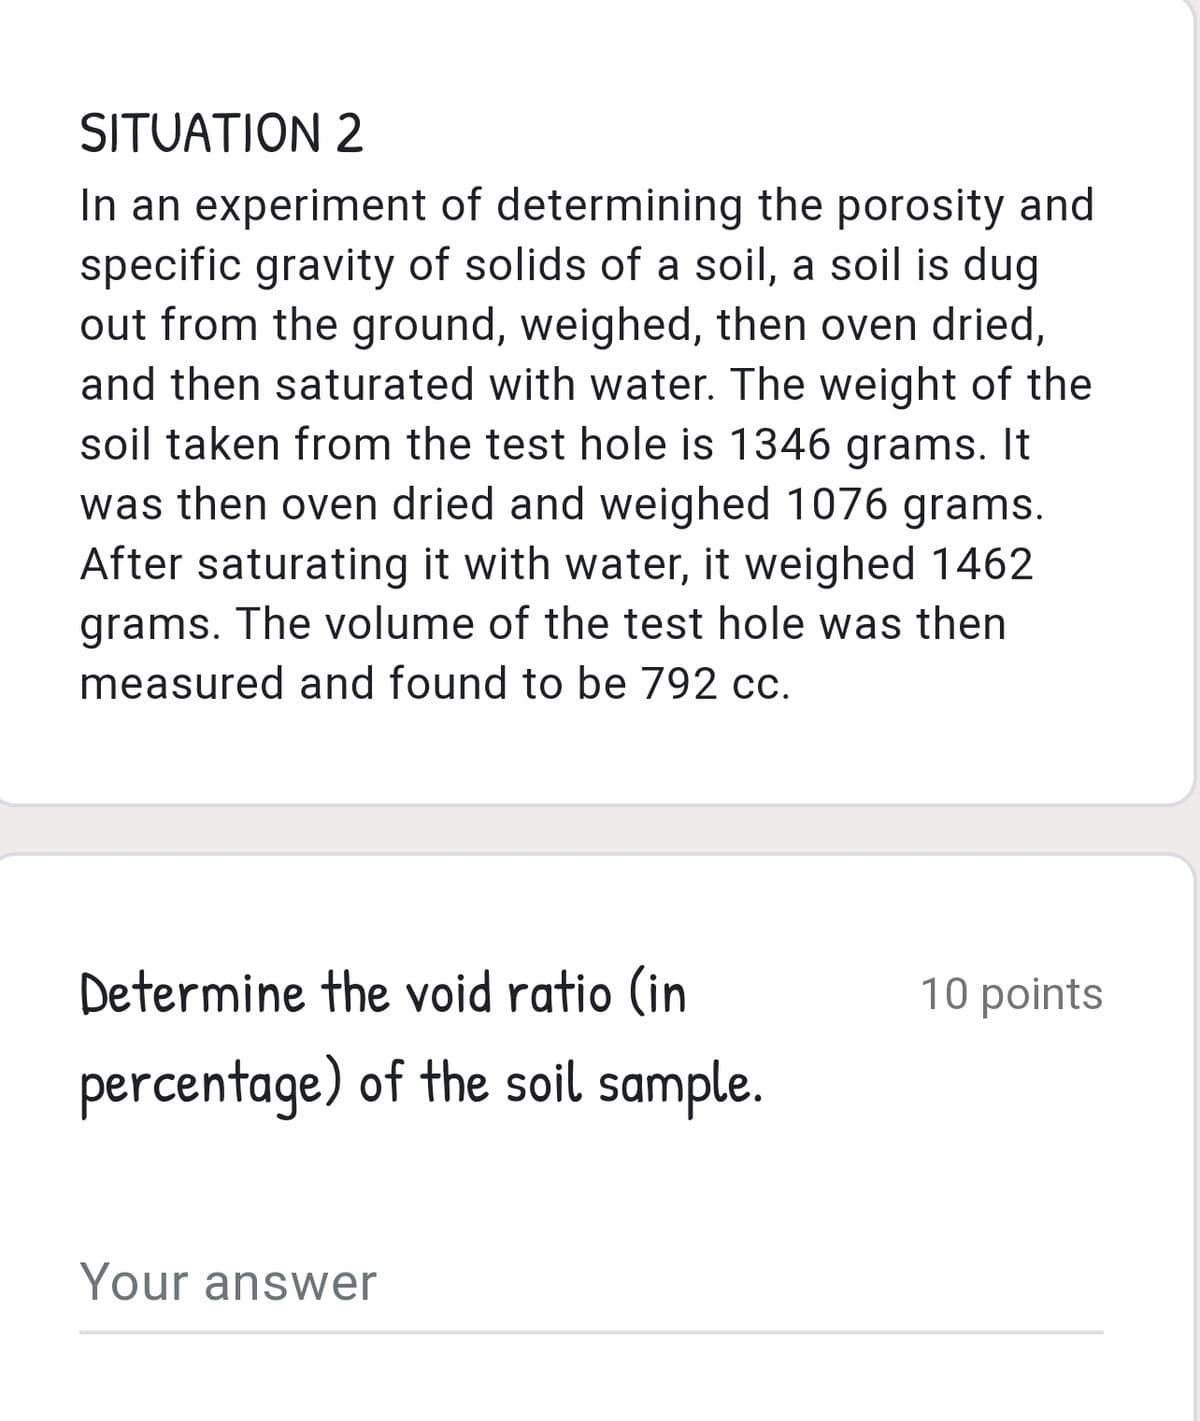 SITUATION 2
In an experiment of determining the porosity and
specific gravity of solids of a soil, a soil is dug
out from the ground, weighed, then oven dried,
and then saturated with water. The weight of the
soil taken from the test hole is 1346 grams. It
was then oven dried and weighed 1076 grams.
After saturating it with water, it weighed 1462
grams. The volume of the test hole was then
measured and found to be 792 cc.
Determine the void ratio (in
10 points
percentage) of the soil sample.
Your answer
